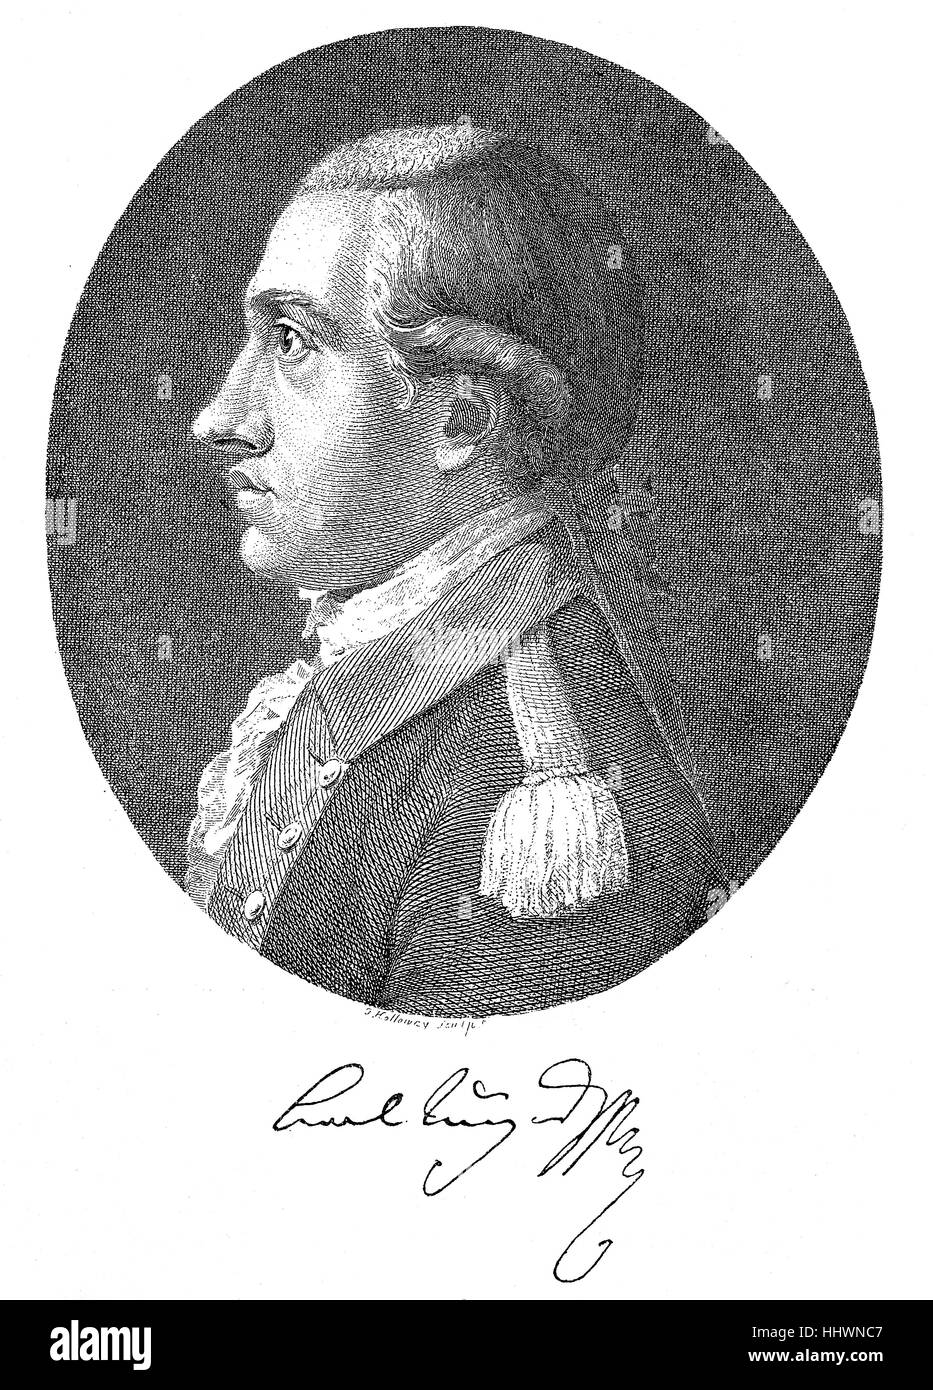 Karl August, Grand Duke of Saxe-Weimar-Eisenach, 3 September 1757 - 14 June 1828, Duke of Saxe-Weimar and of Saxe-Eisenach, drawing by Lips, 1780, historical image or illustration, published 1890, digital improved Stock Photo